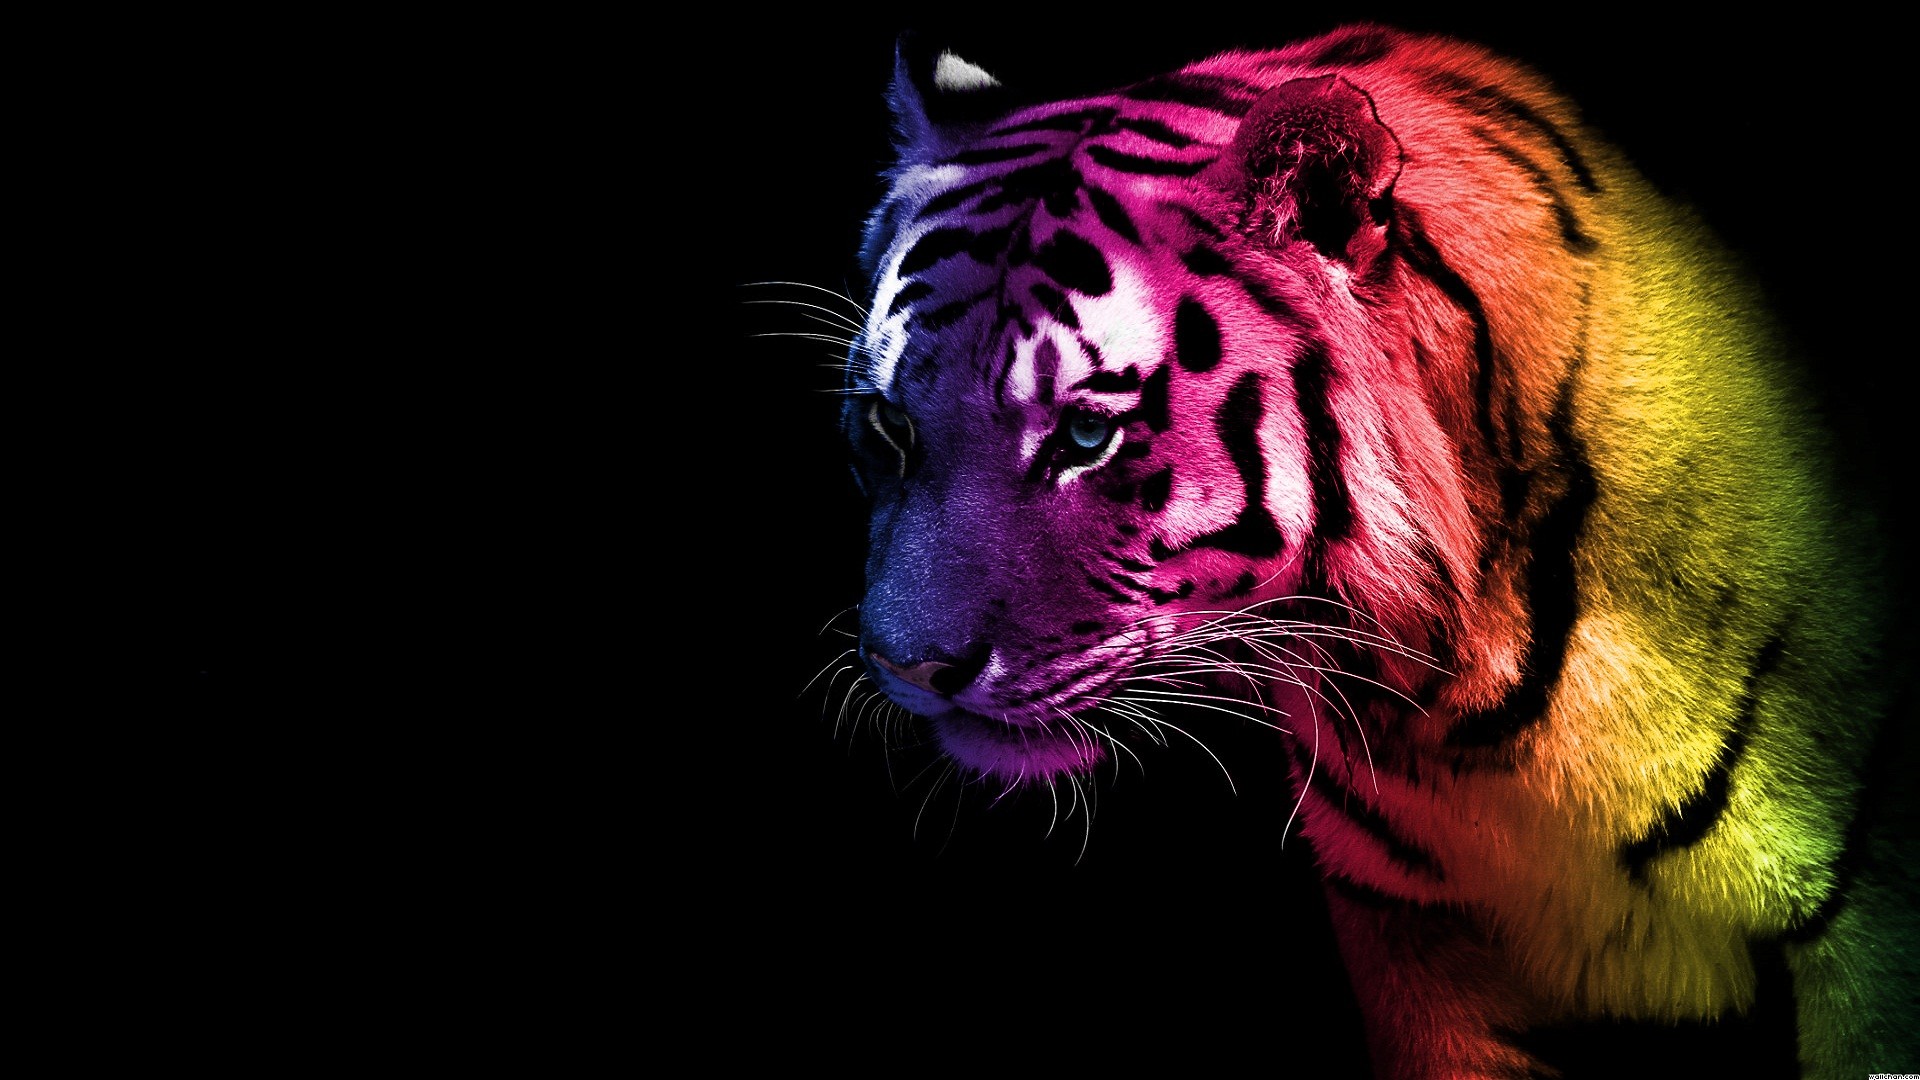 Search Results for “rainbow tiger wallpaper” – Adorable Wallpapers